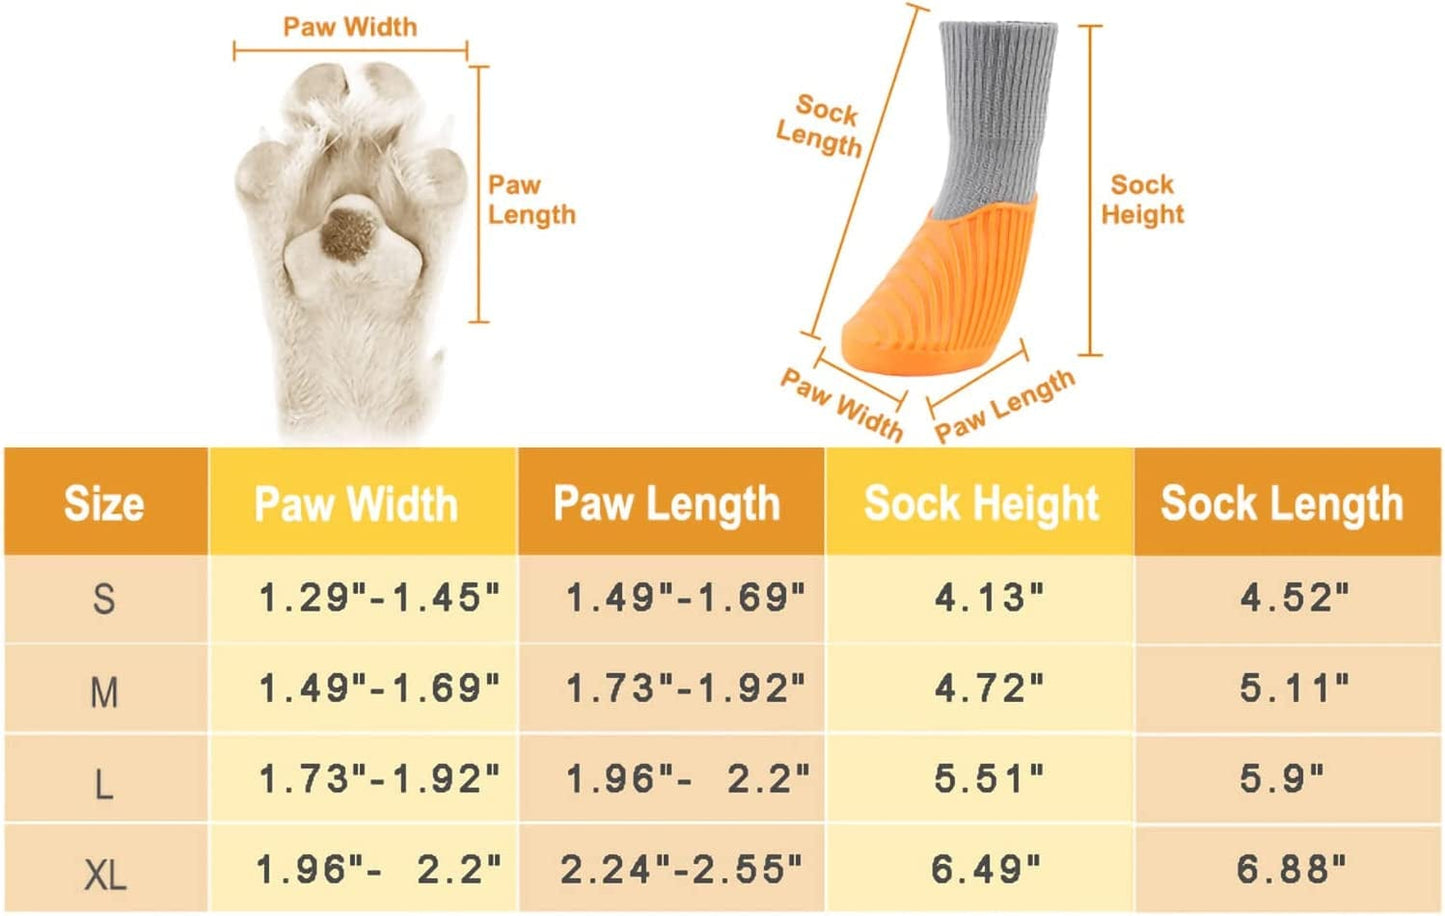 Orange Rubber Dog Boots 4 Packs for Hiking and Running, anti Slip Waterproof Dog Shoes and Socks with Velcro Strap Suitable for Indoor, Outdoor. Small/Medium/Large Dogs Paw Protector. L